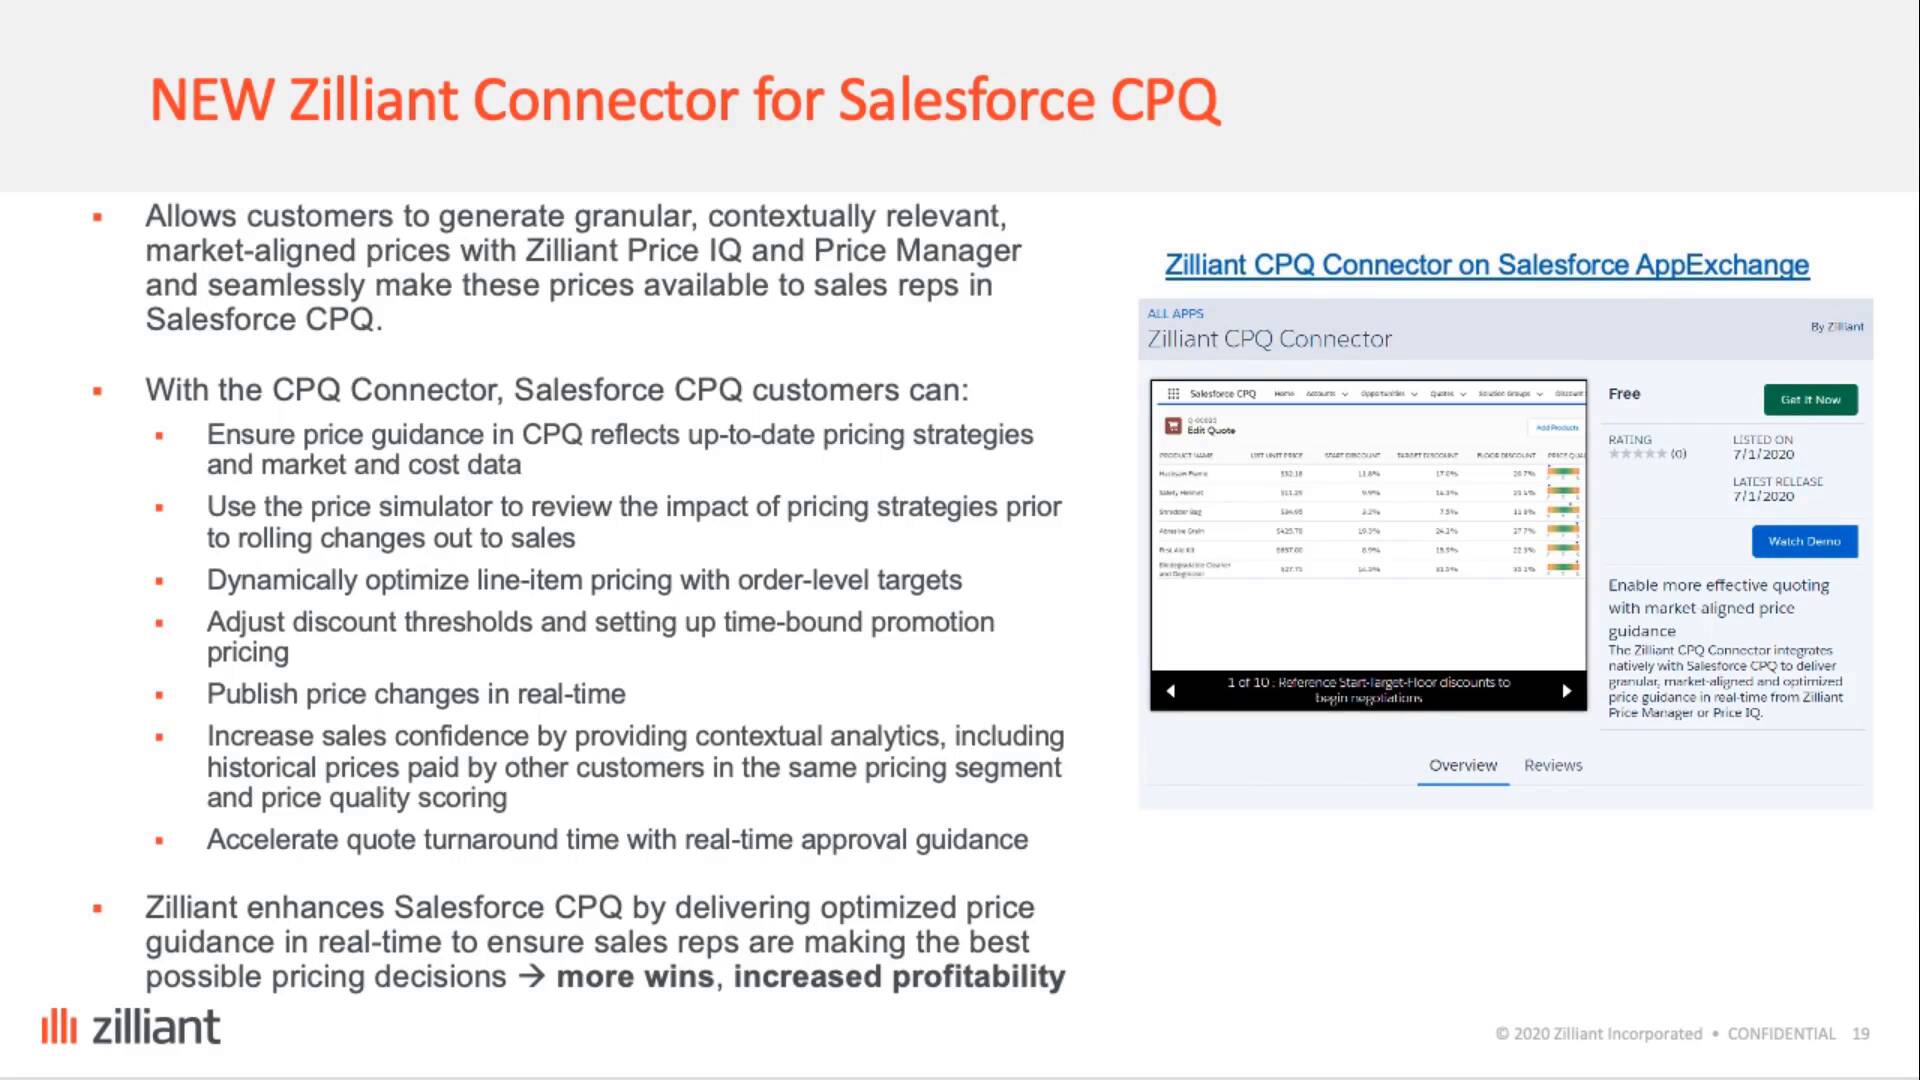 [Zilliant + Salesforce] Deliver Market-Aligned Price Guidance to Sales